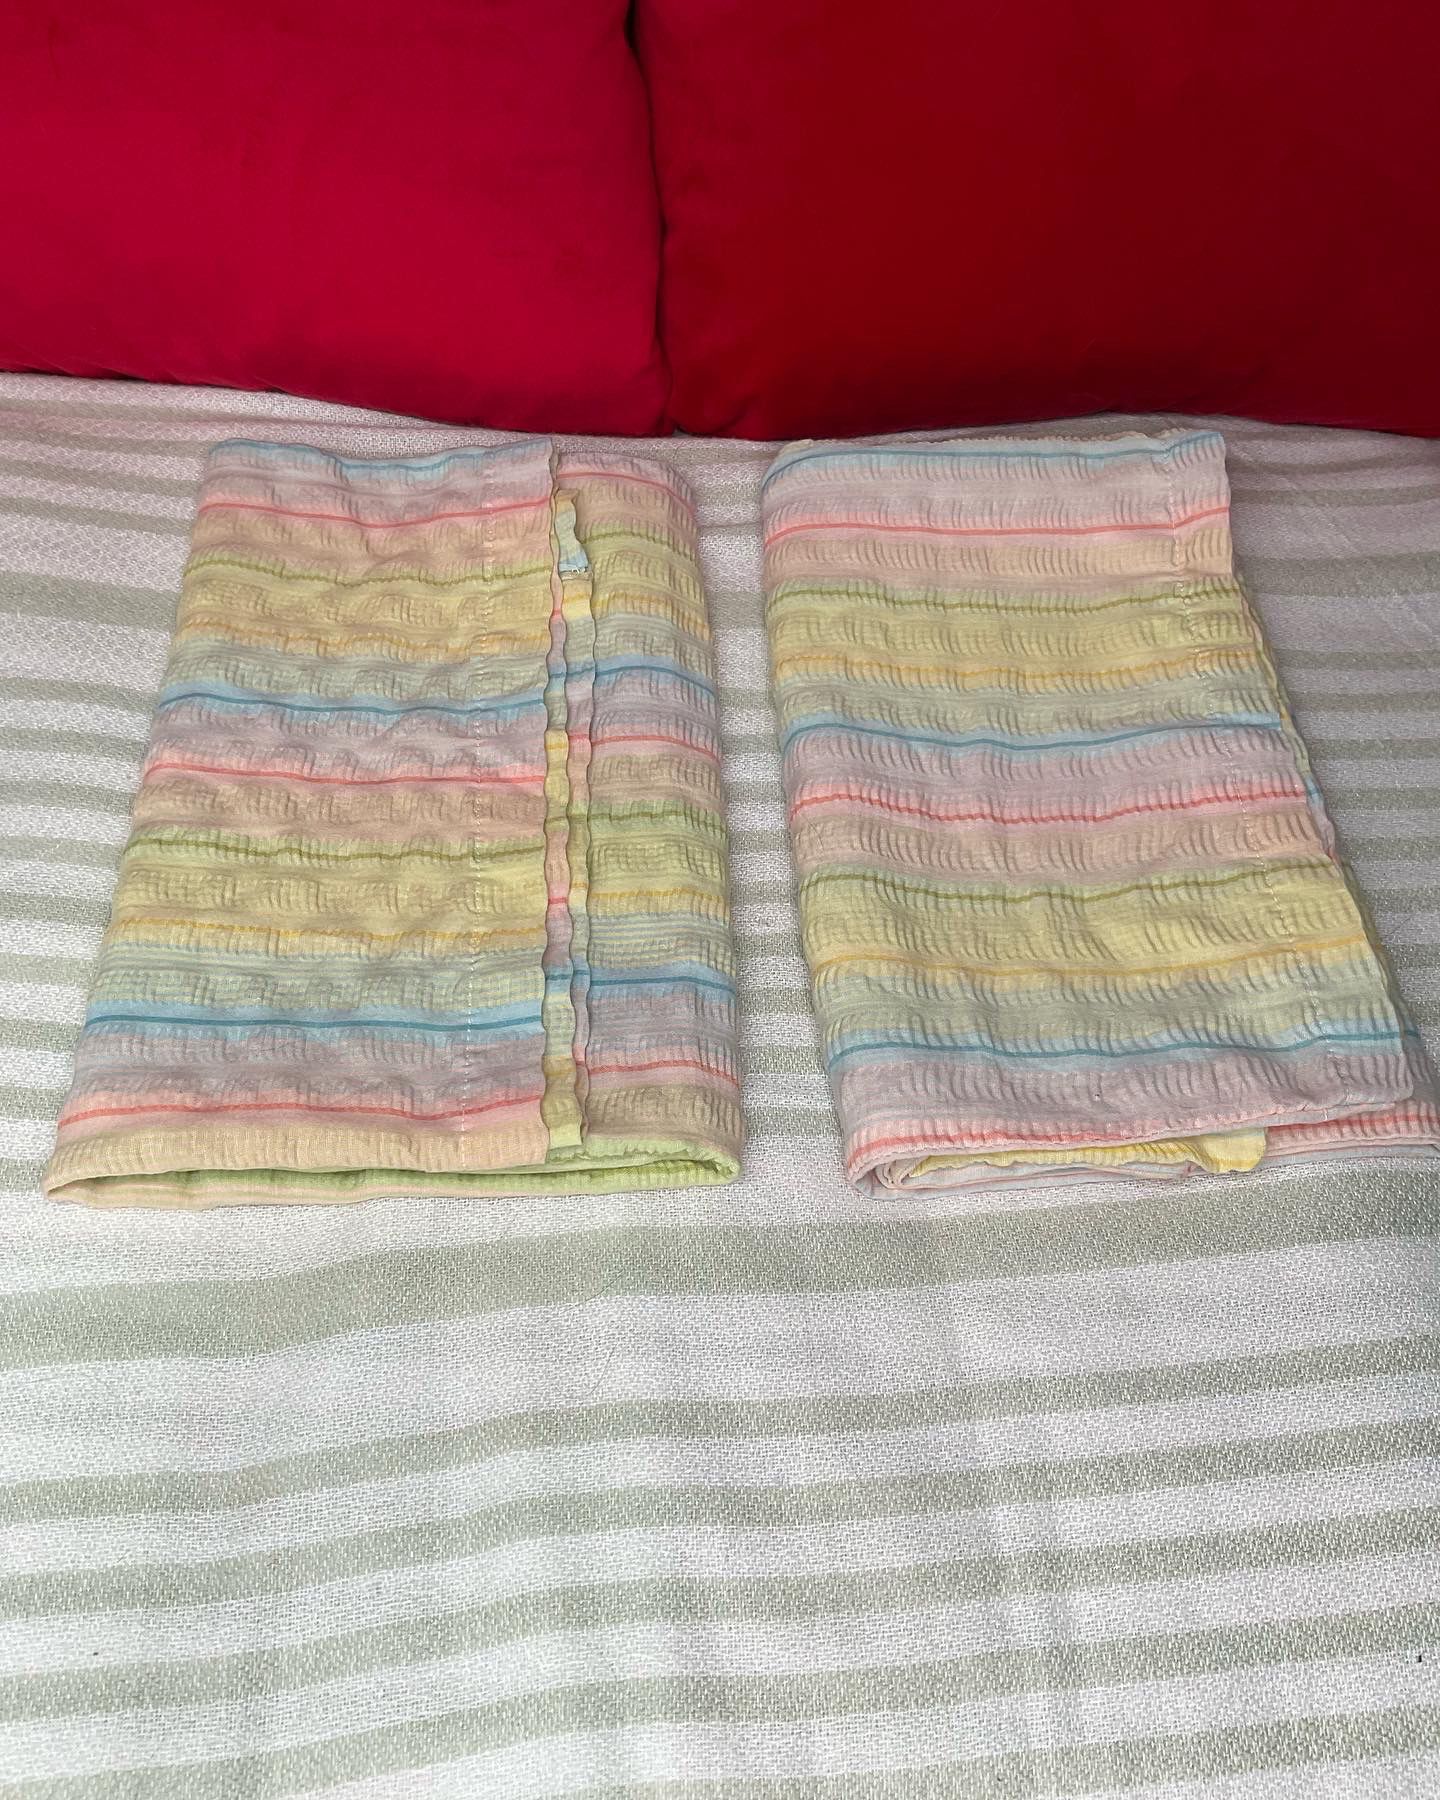 Vintage Multi Colored Large Pillow Cases